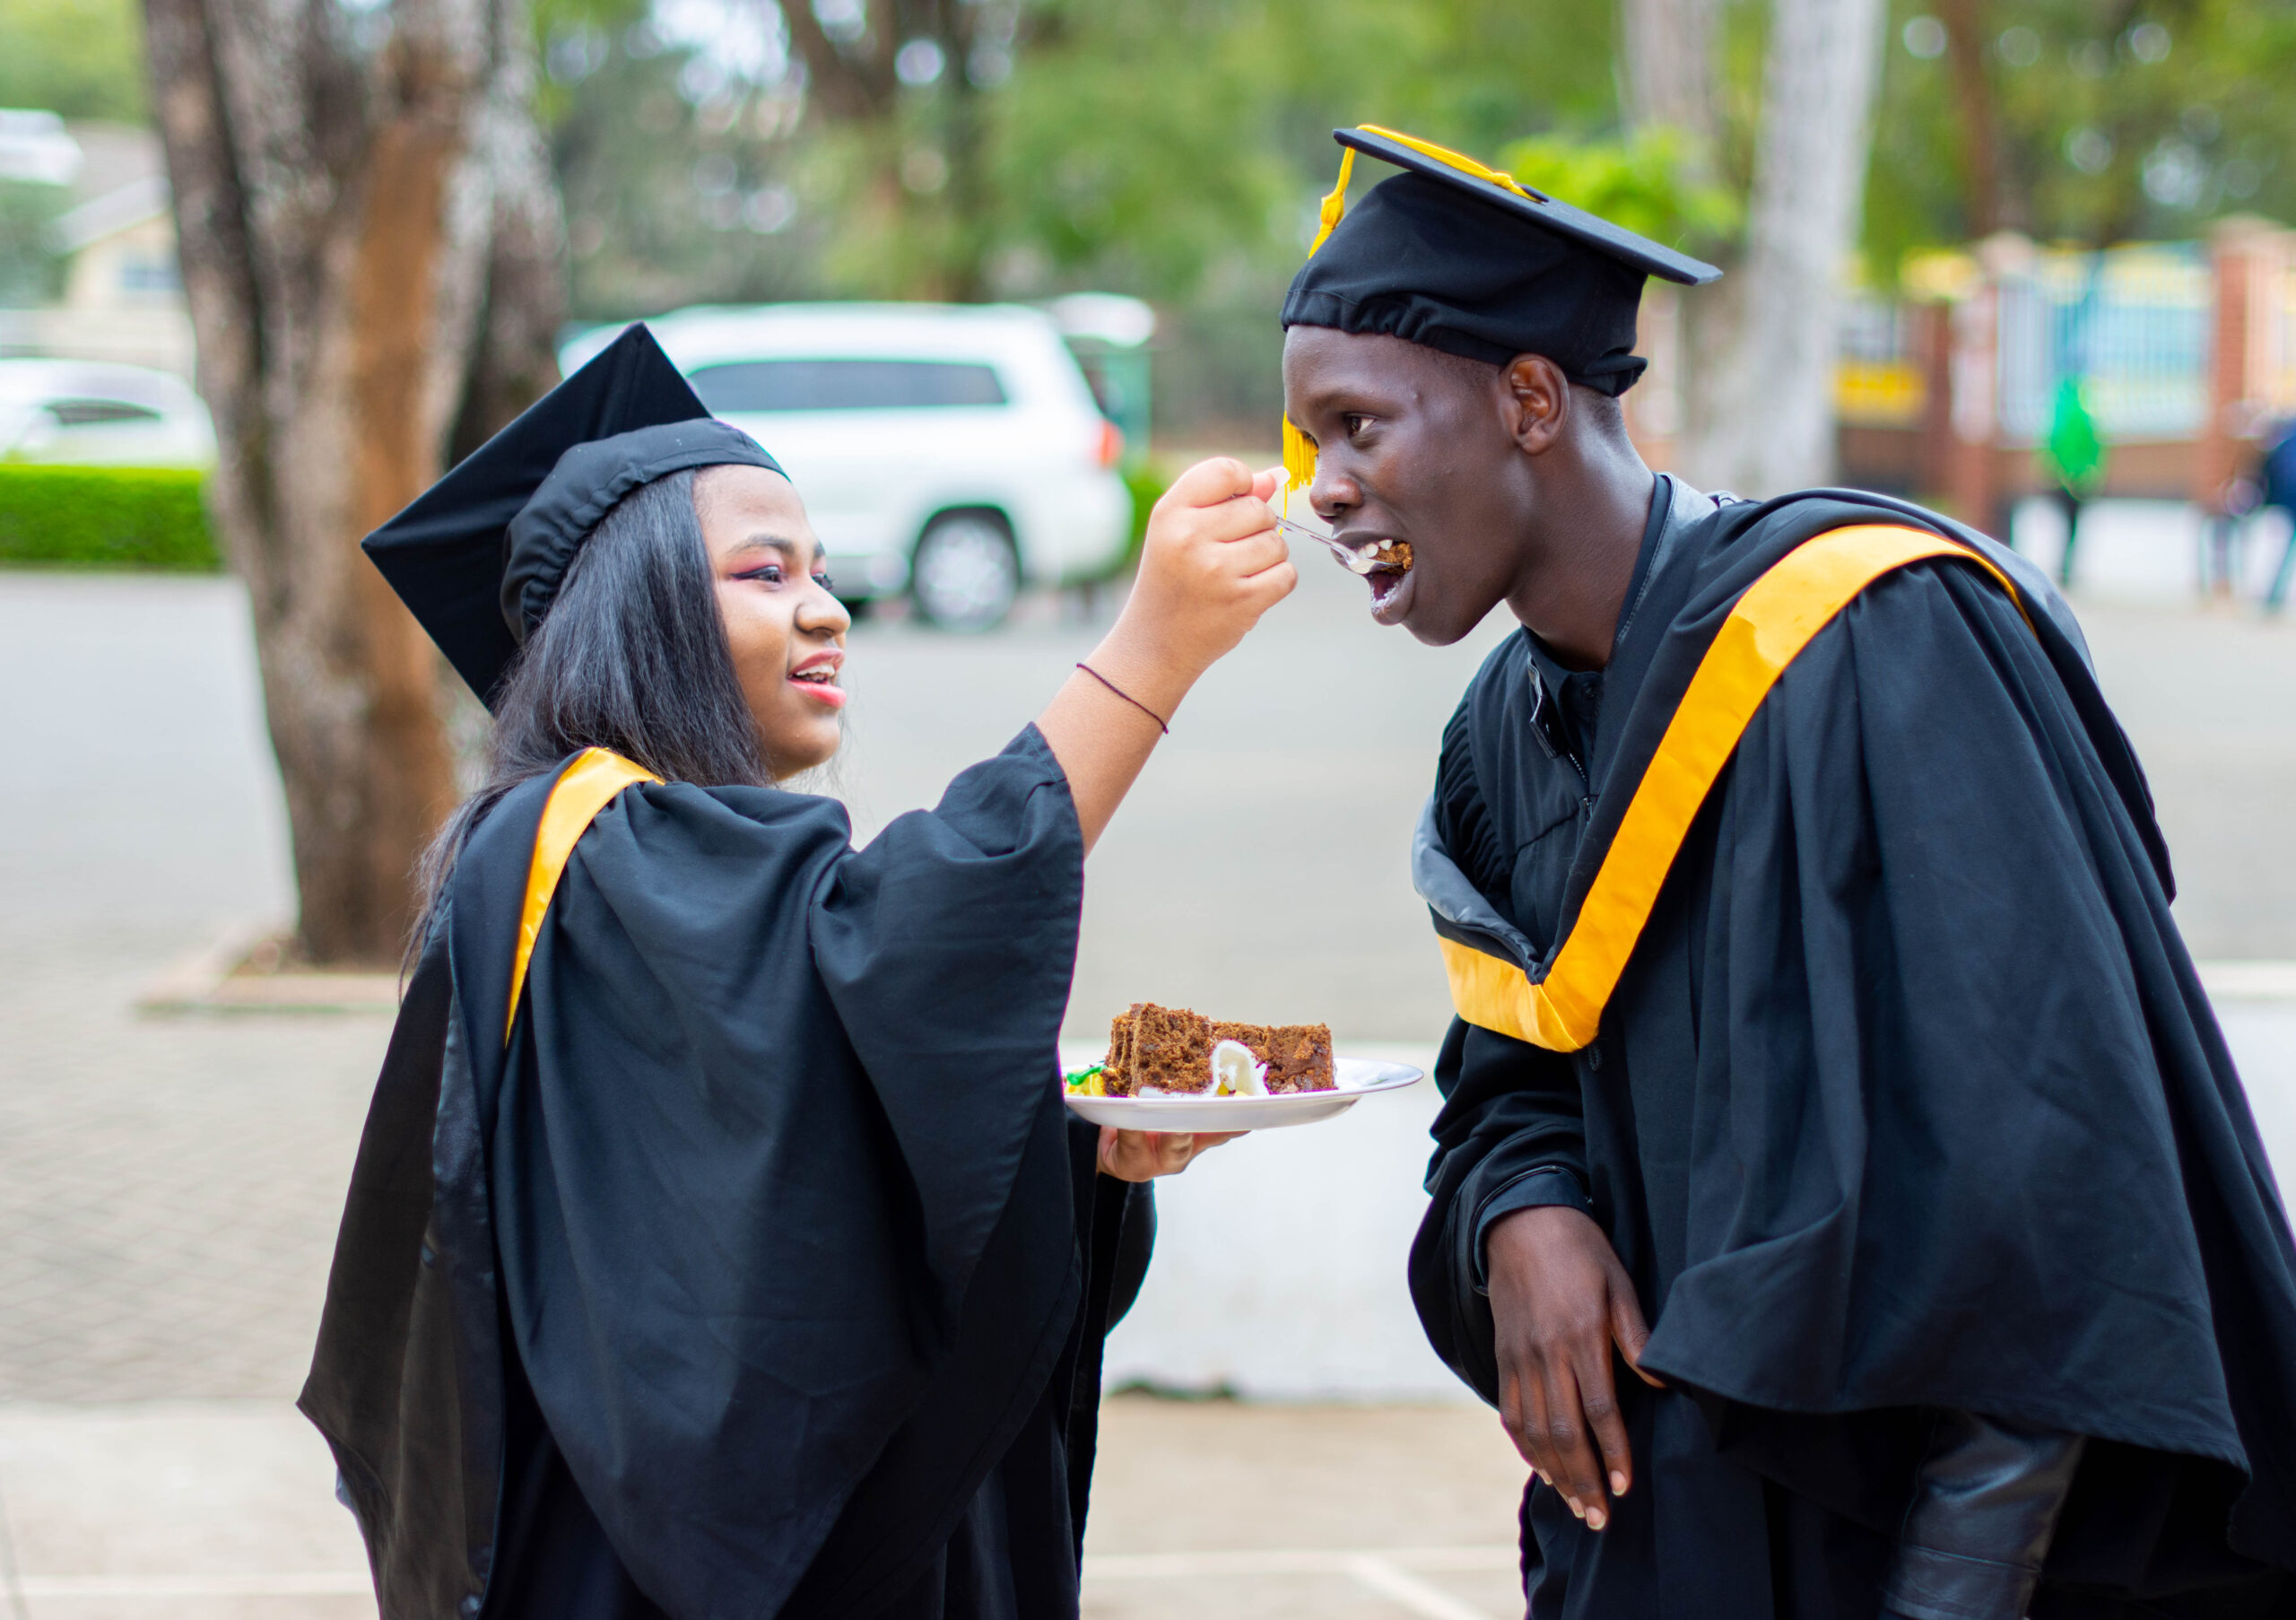 Graduands sharing a piece of cake